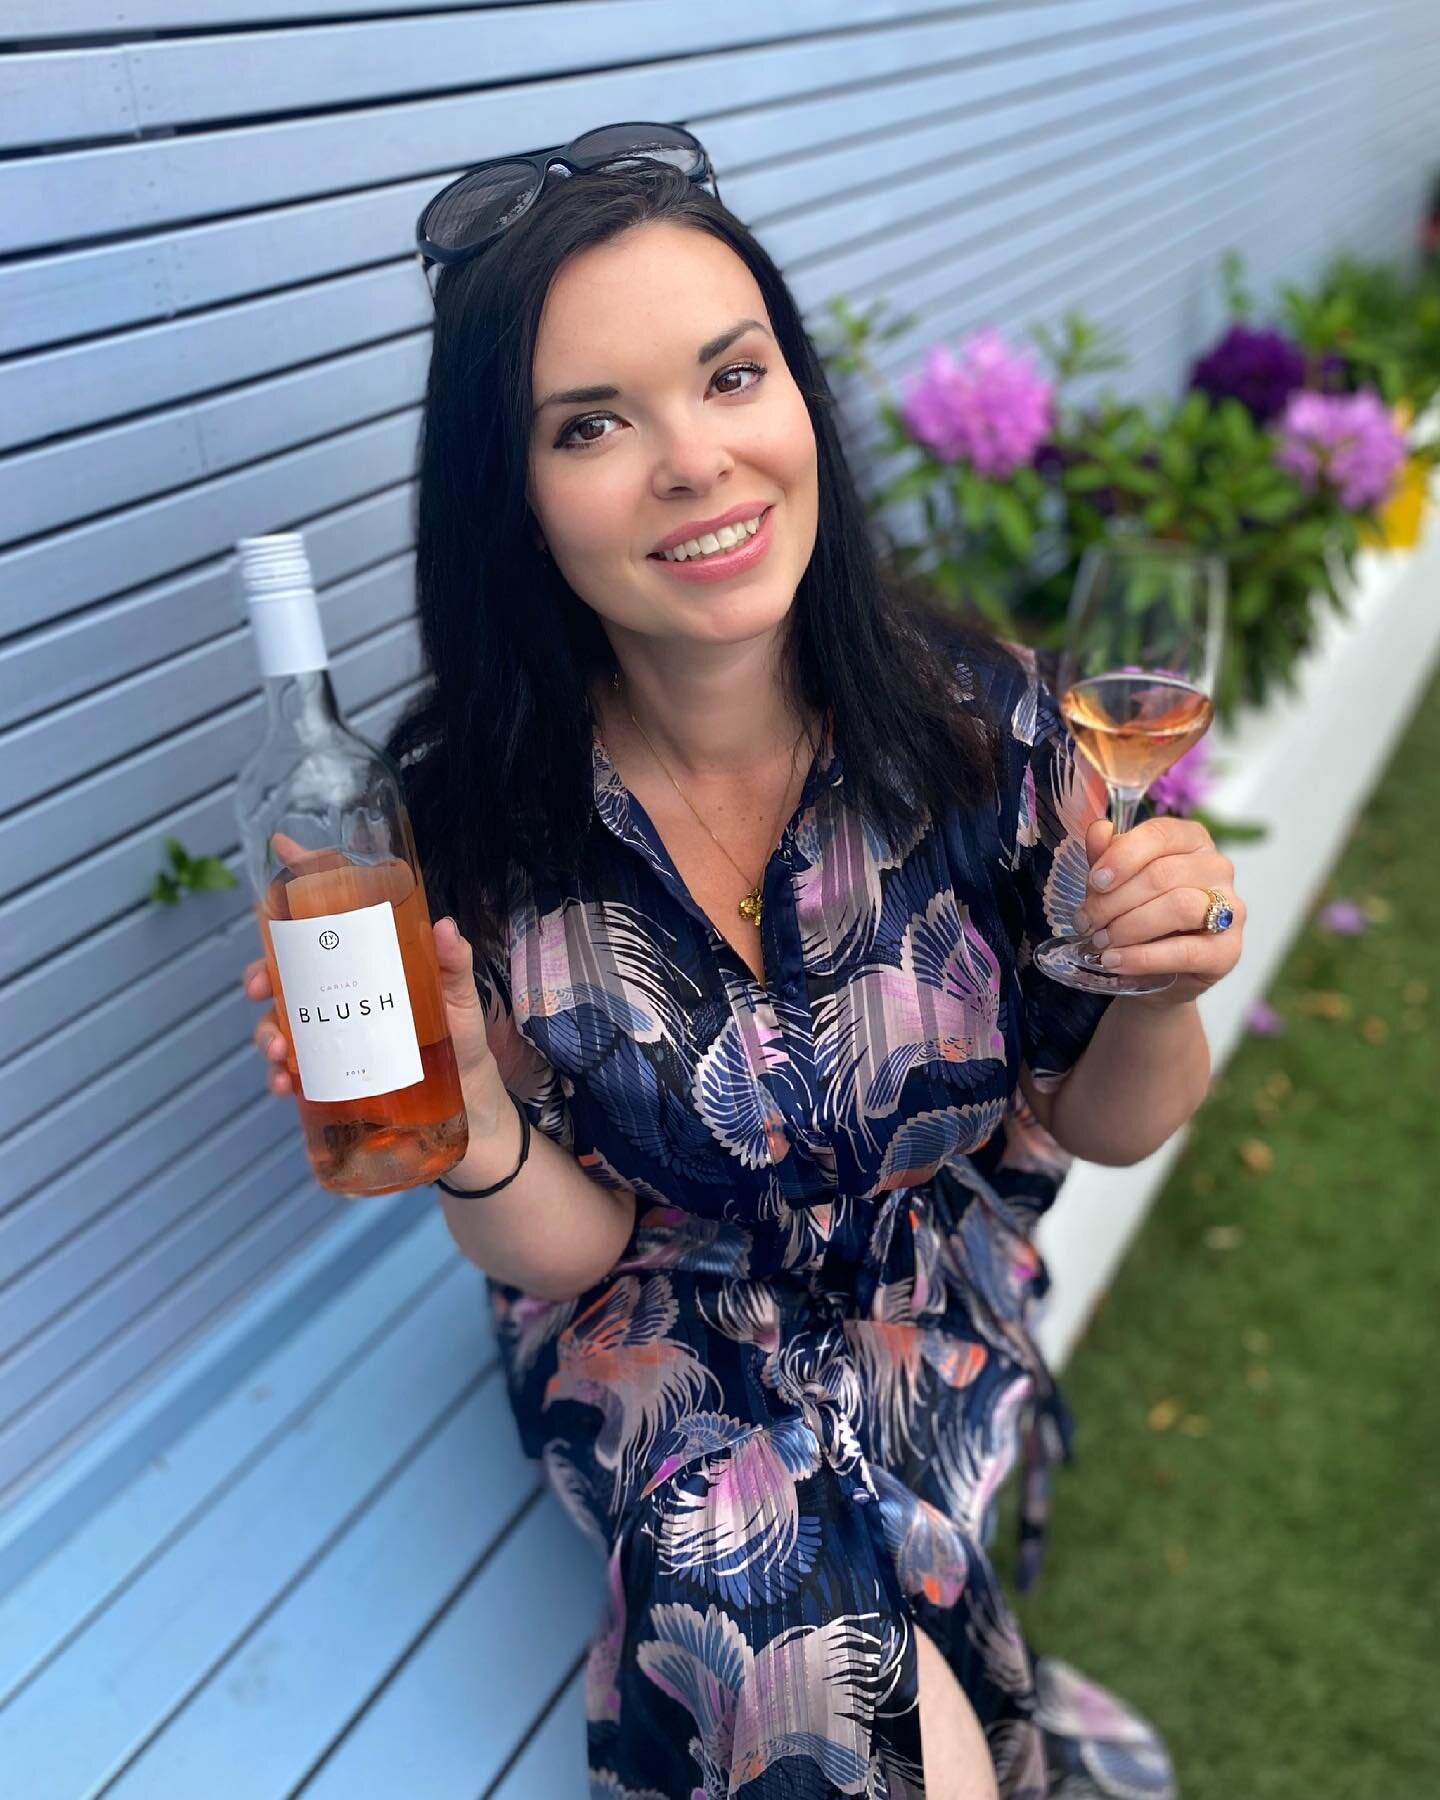 🏴󠁧󠁢󠁷󠁬󠁳󠁿 My first #WelshWine - which I admittedly cracked into the night before #WelshWineWeek officially began because it was a beautiful evening calling for a ros&eacute;.

🍇The 2019 #ros&eacute; is 50% #Triomphe, typically a grape with very